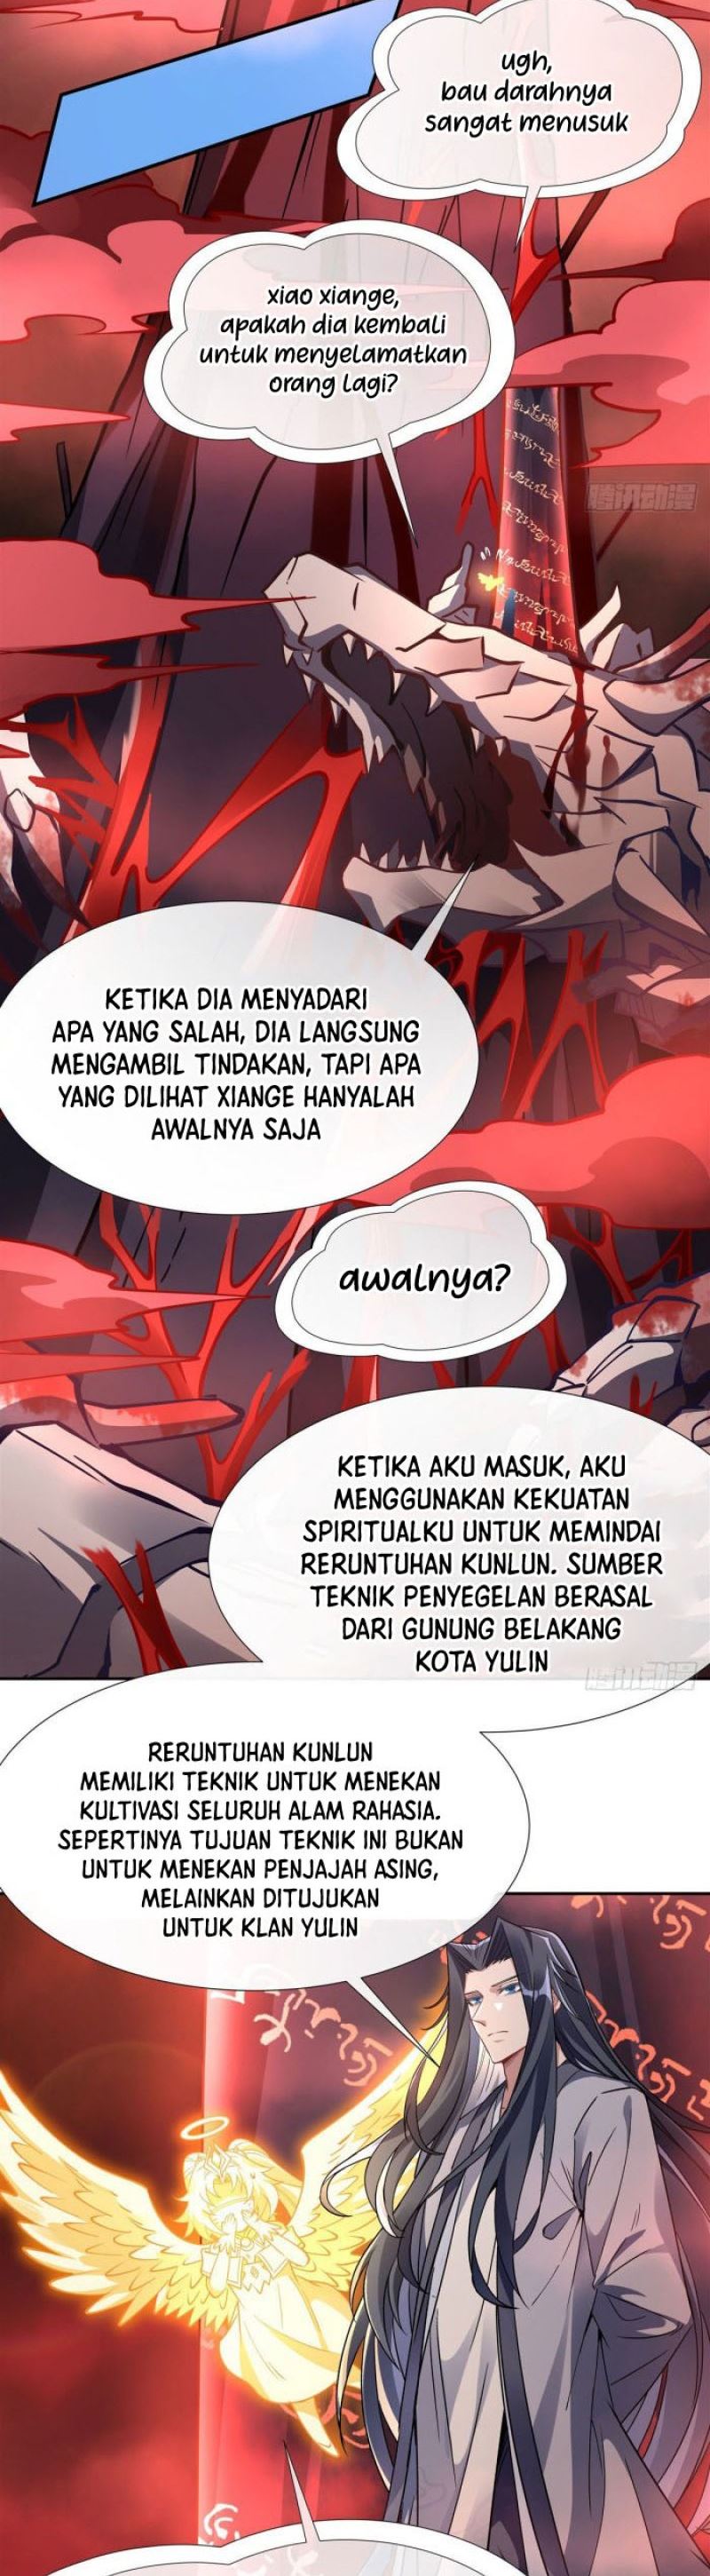 Dilarang COPAS - situs resmi www.mangacanblog.com - Komik my female apprentices are all big shots from the future 123 - chapter 123 124 Indonesia my female apprentices are all big shots from the future 123 - chapter 123 Terbaru 18|Baca Manga Komik Indonesia|Mangacan